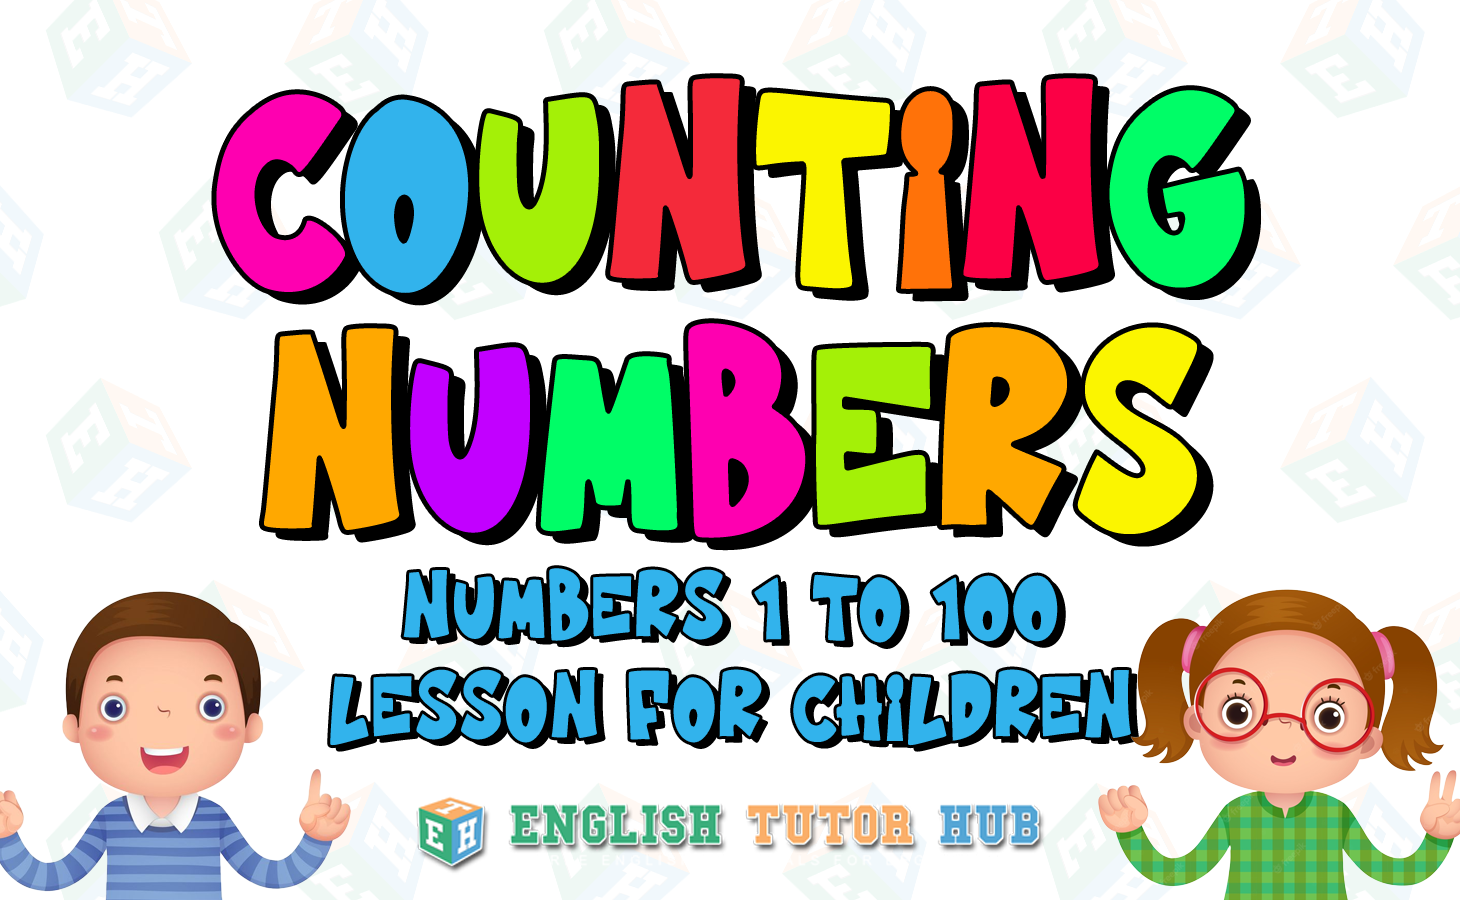 Counting Numbers | Numbers 1 to 100 Lesson For Children